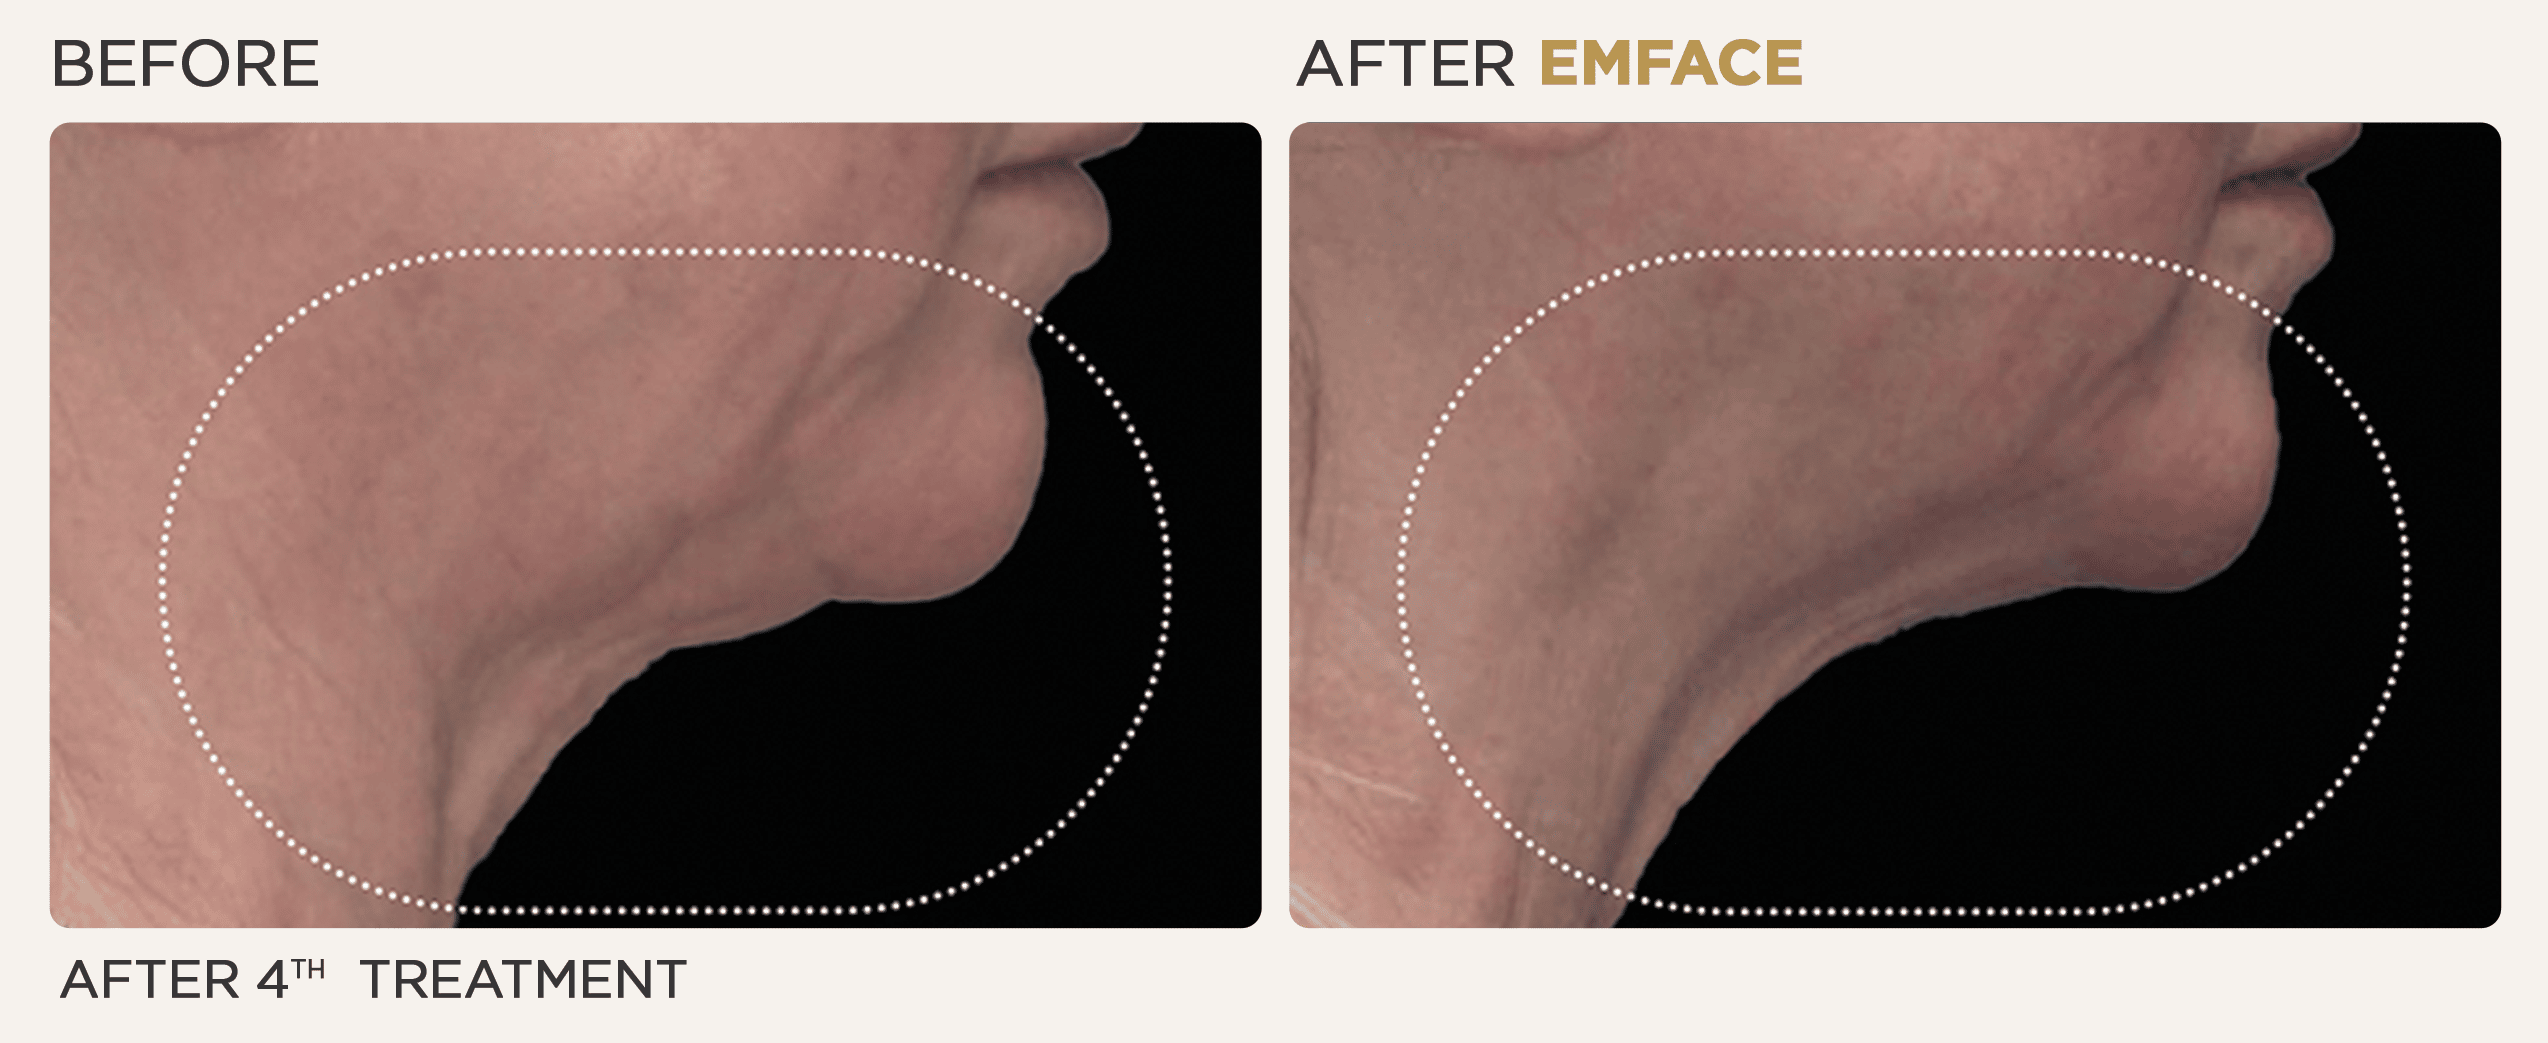 Woman's neck showing before and after results from EMface treatment at Vitalyc Medspa in Addison.